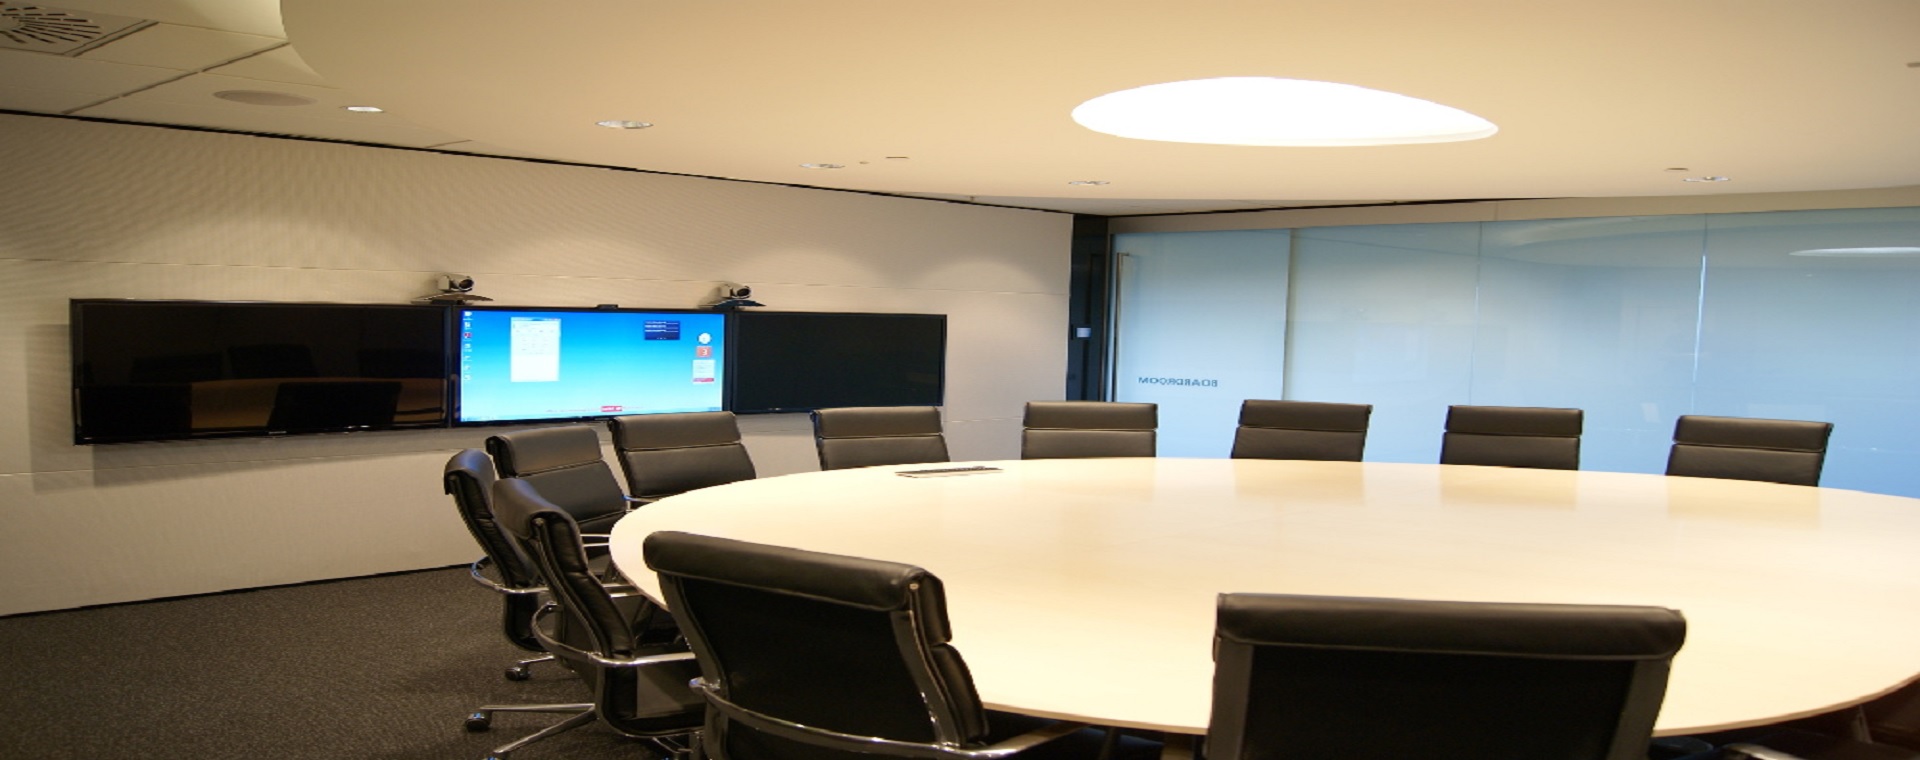 BECA board room with 3 55" commercial display panels for presentations and video conferencing, and a large round table with chairs